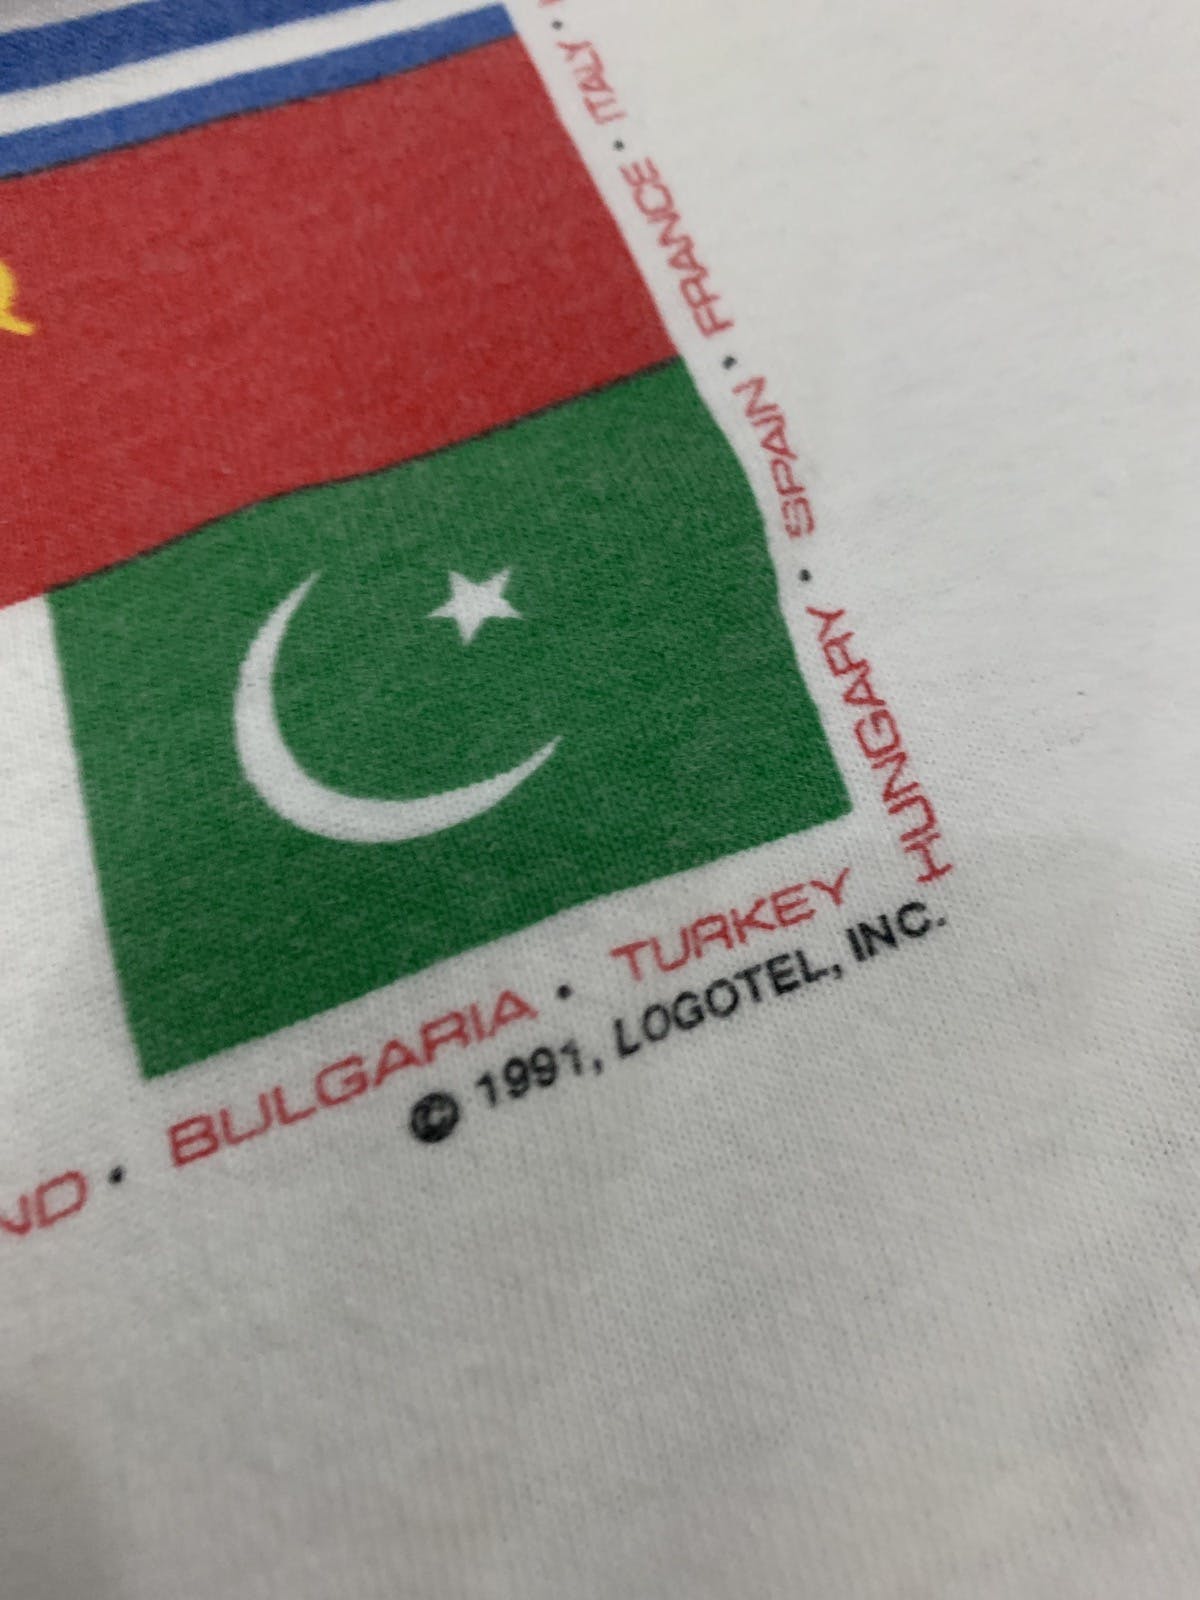 🔥VINTAGE 1991 VICTORY IN THE PERSIAN GULF WHITE T-SHIRT - 9